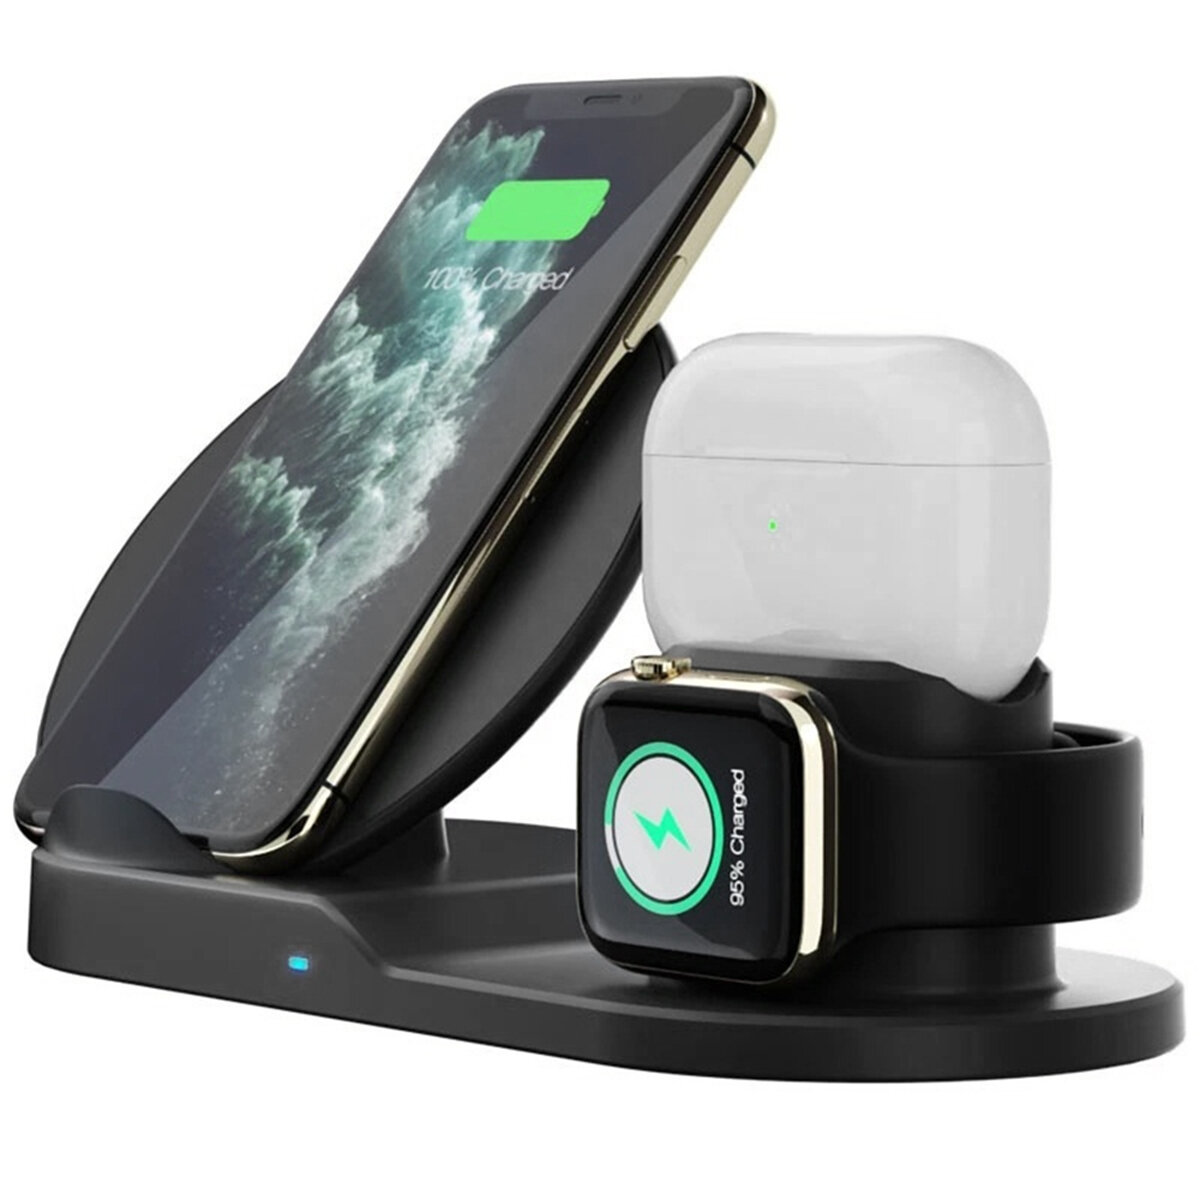 

Bakeey 10W 7.5W 3 in 1 Wireless Charger Fast Charging Stand Holder For iPhone XS 11Pro MI10 iWatch TWS Headset Earphones